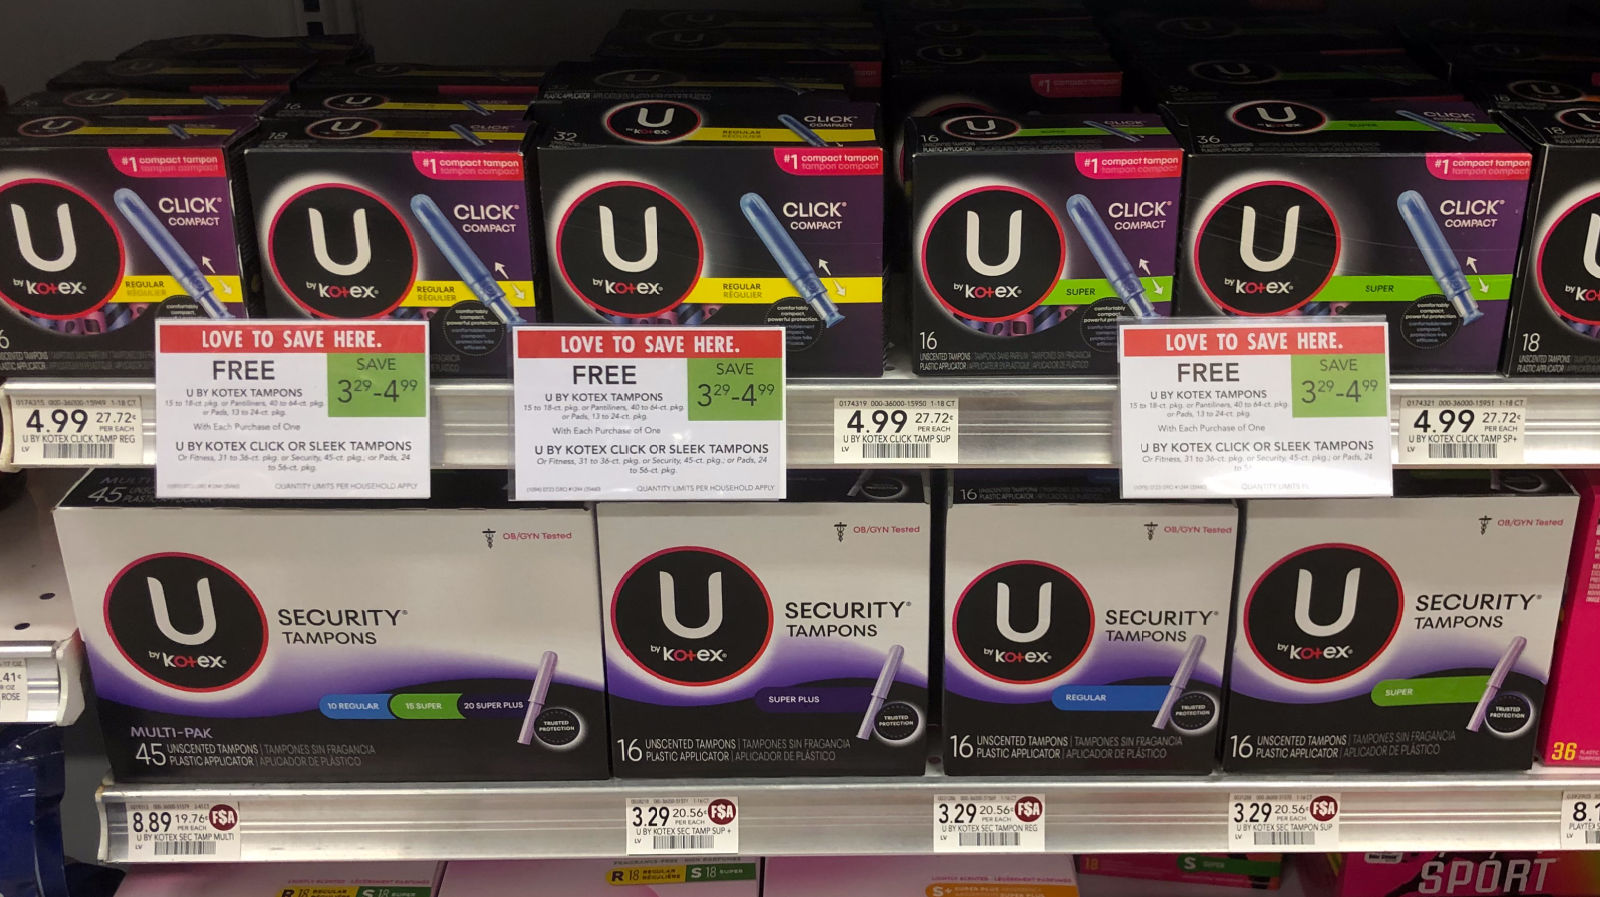 Pick Up Fantastic Savings On U by Kotex Tampons, Pads & Liners This Week At Publix on I Heart Publix